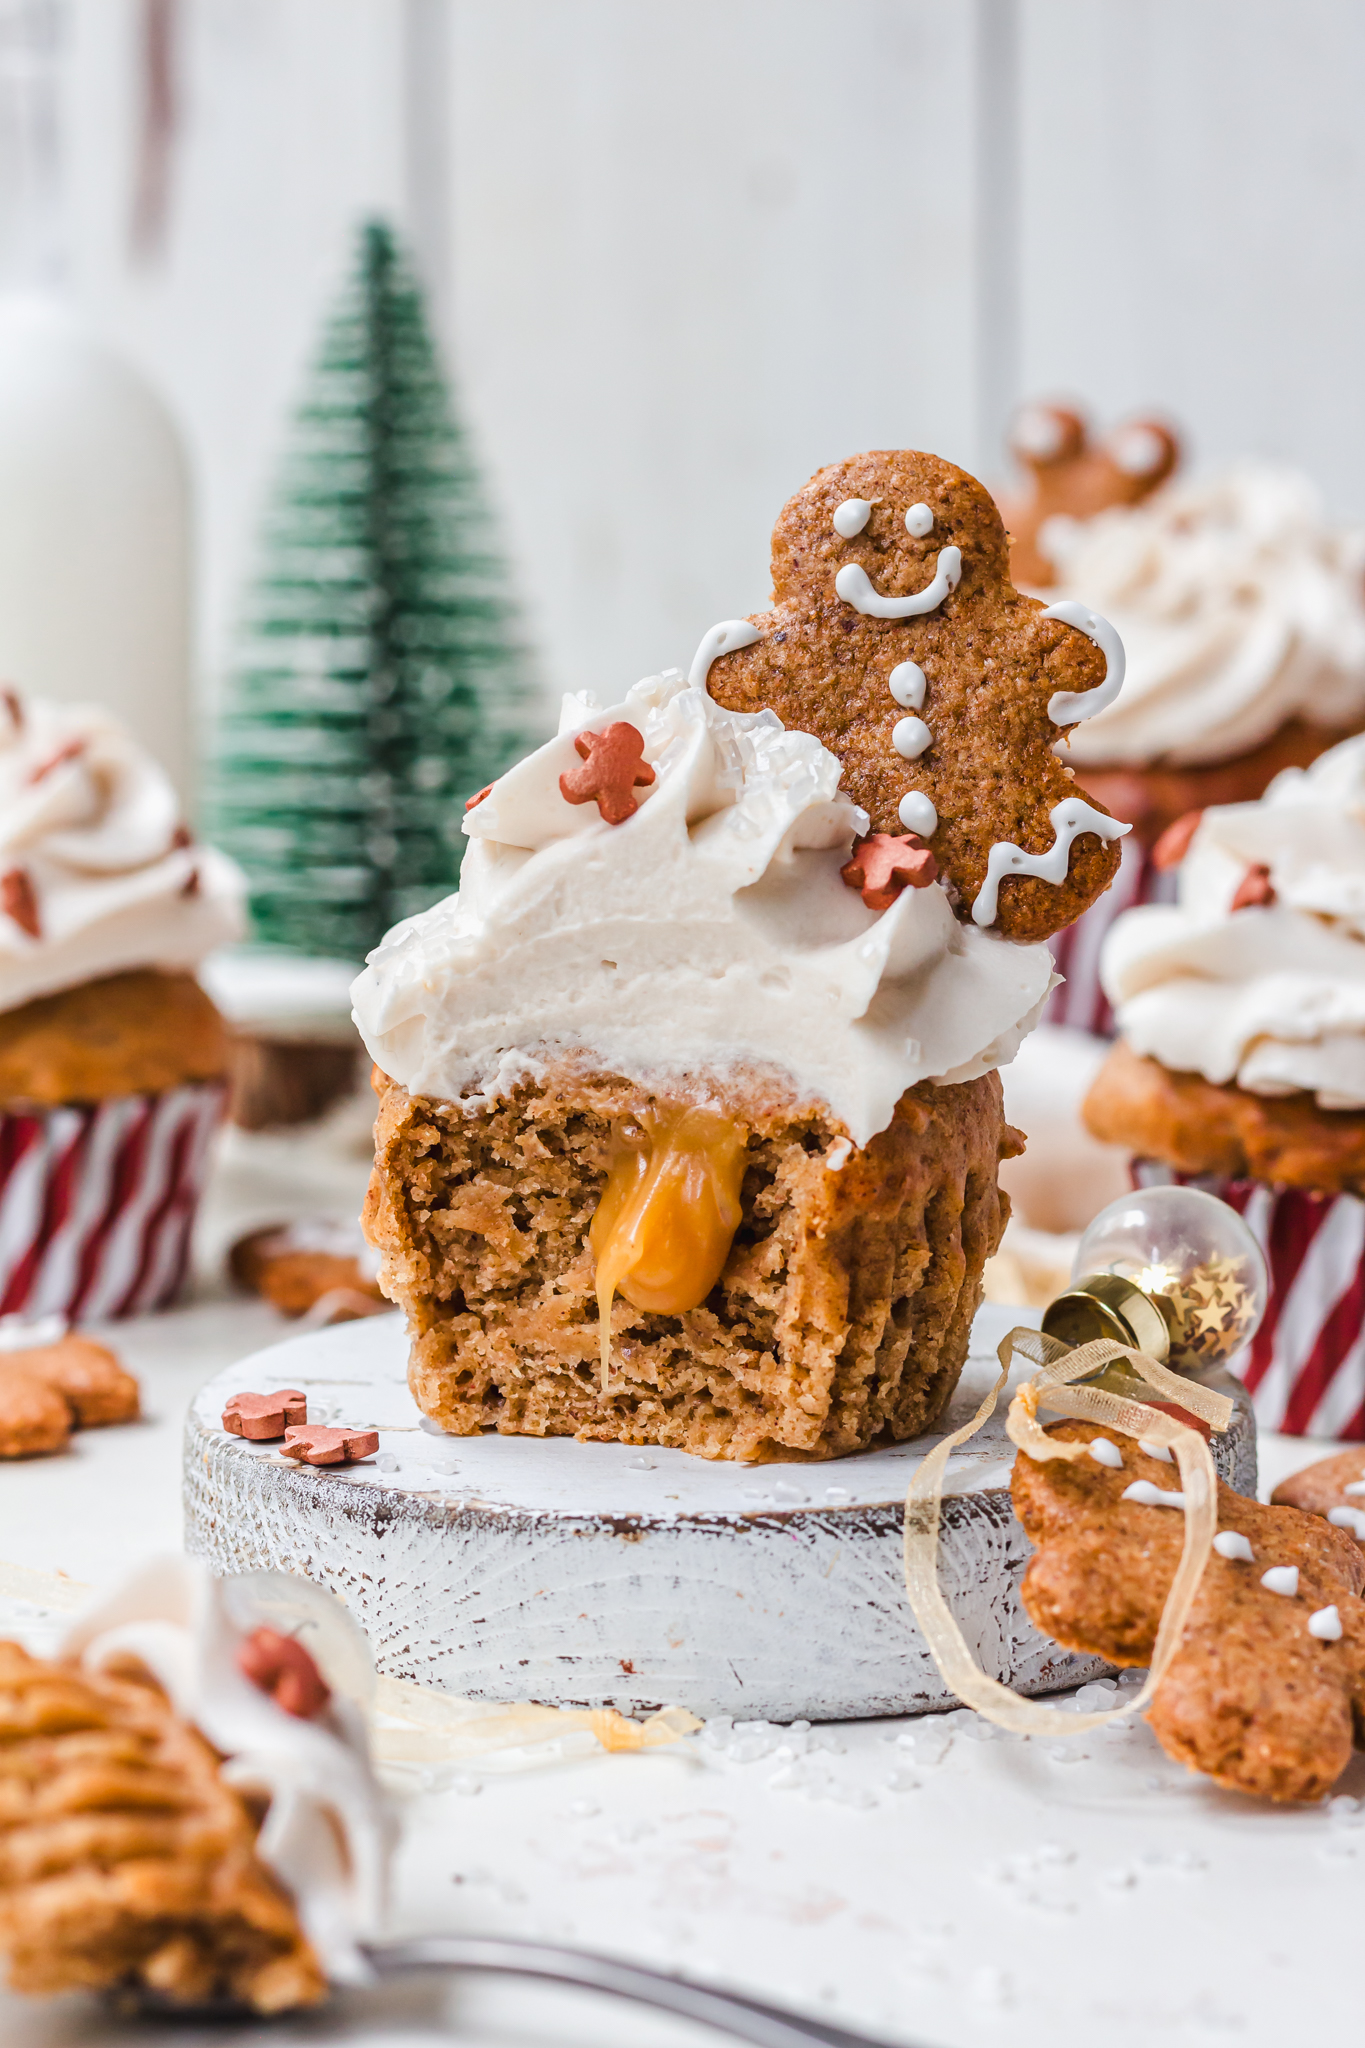 Gingerbread Caramel Cupcake with a gooey caramel middle